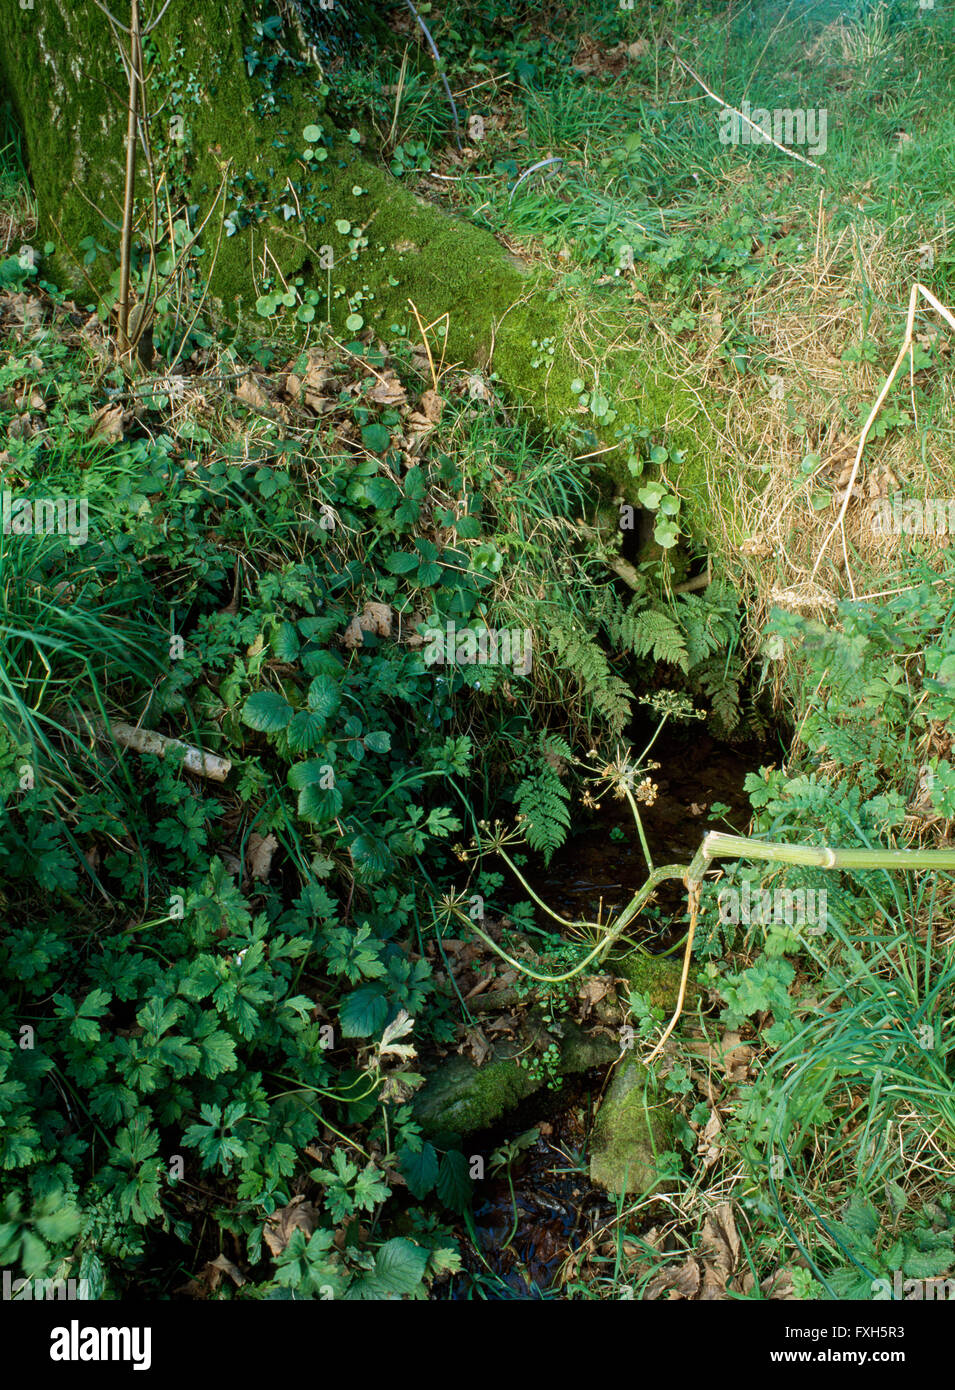 Overgrown spring on Bernard's Well farm, Henry's Moat, Pembrokeshire, associated with Early Christian St Brynach who founded a church at Nevern. Stock Photo